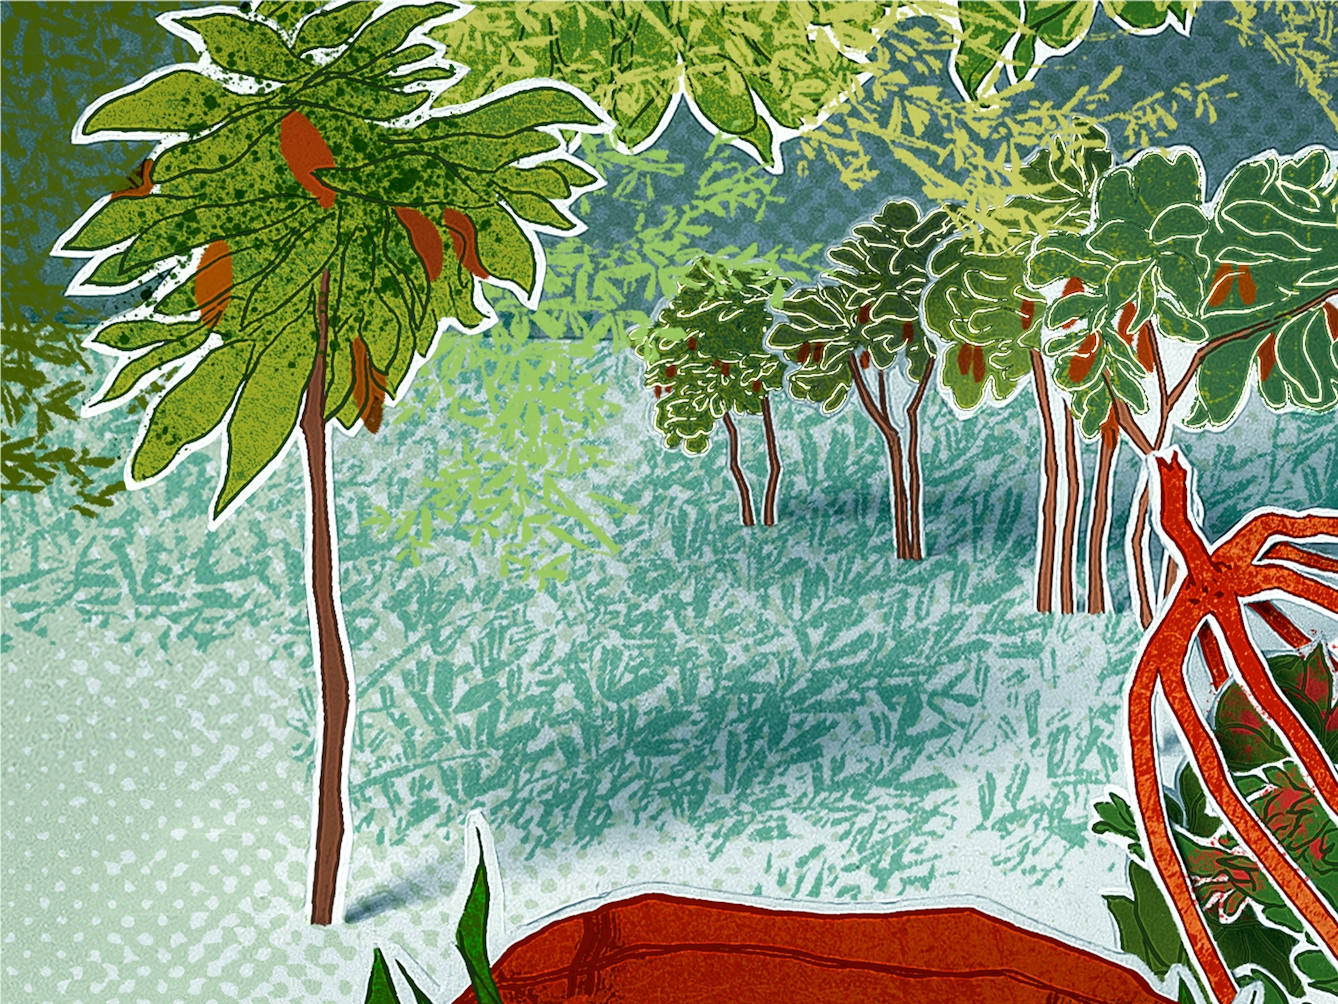 Photograph of a papercut 3D artwork. Detail from a larger artwork, showing two brunette children, possibly siblings, dressed in simple white and blue clothing and are crouching down amongst different coloured shrubs, plants and trees. The girl, who appears older than the boy, is holding an abstract, cocoa bean-shaped hollow red structure. Inside it is a miniature brunette male wearing yellow robes, and some red and green shrubbery. He is looking upwards towards the girl with his hand outstretched.